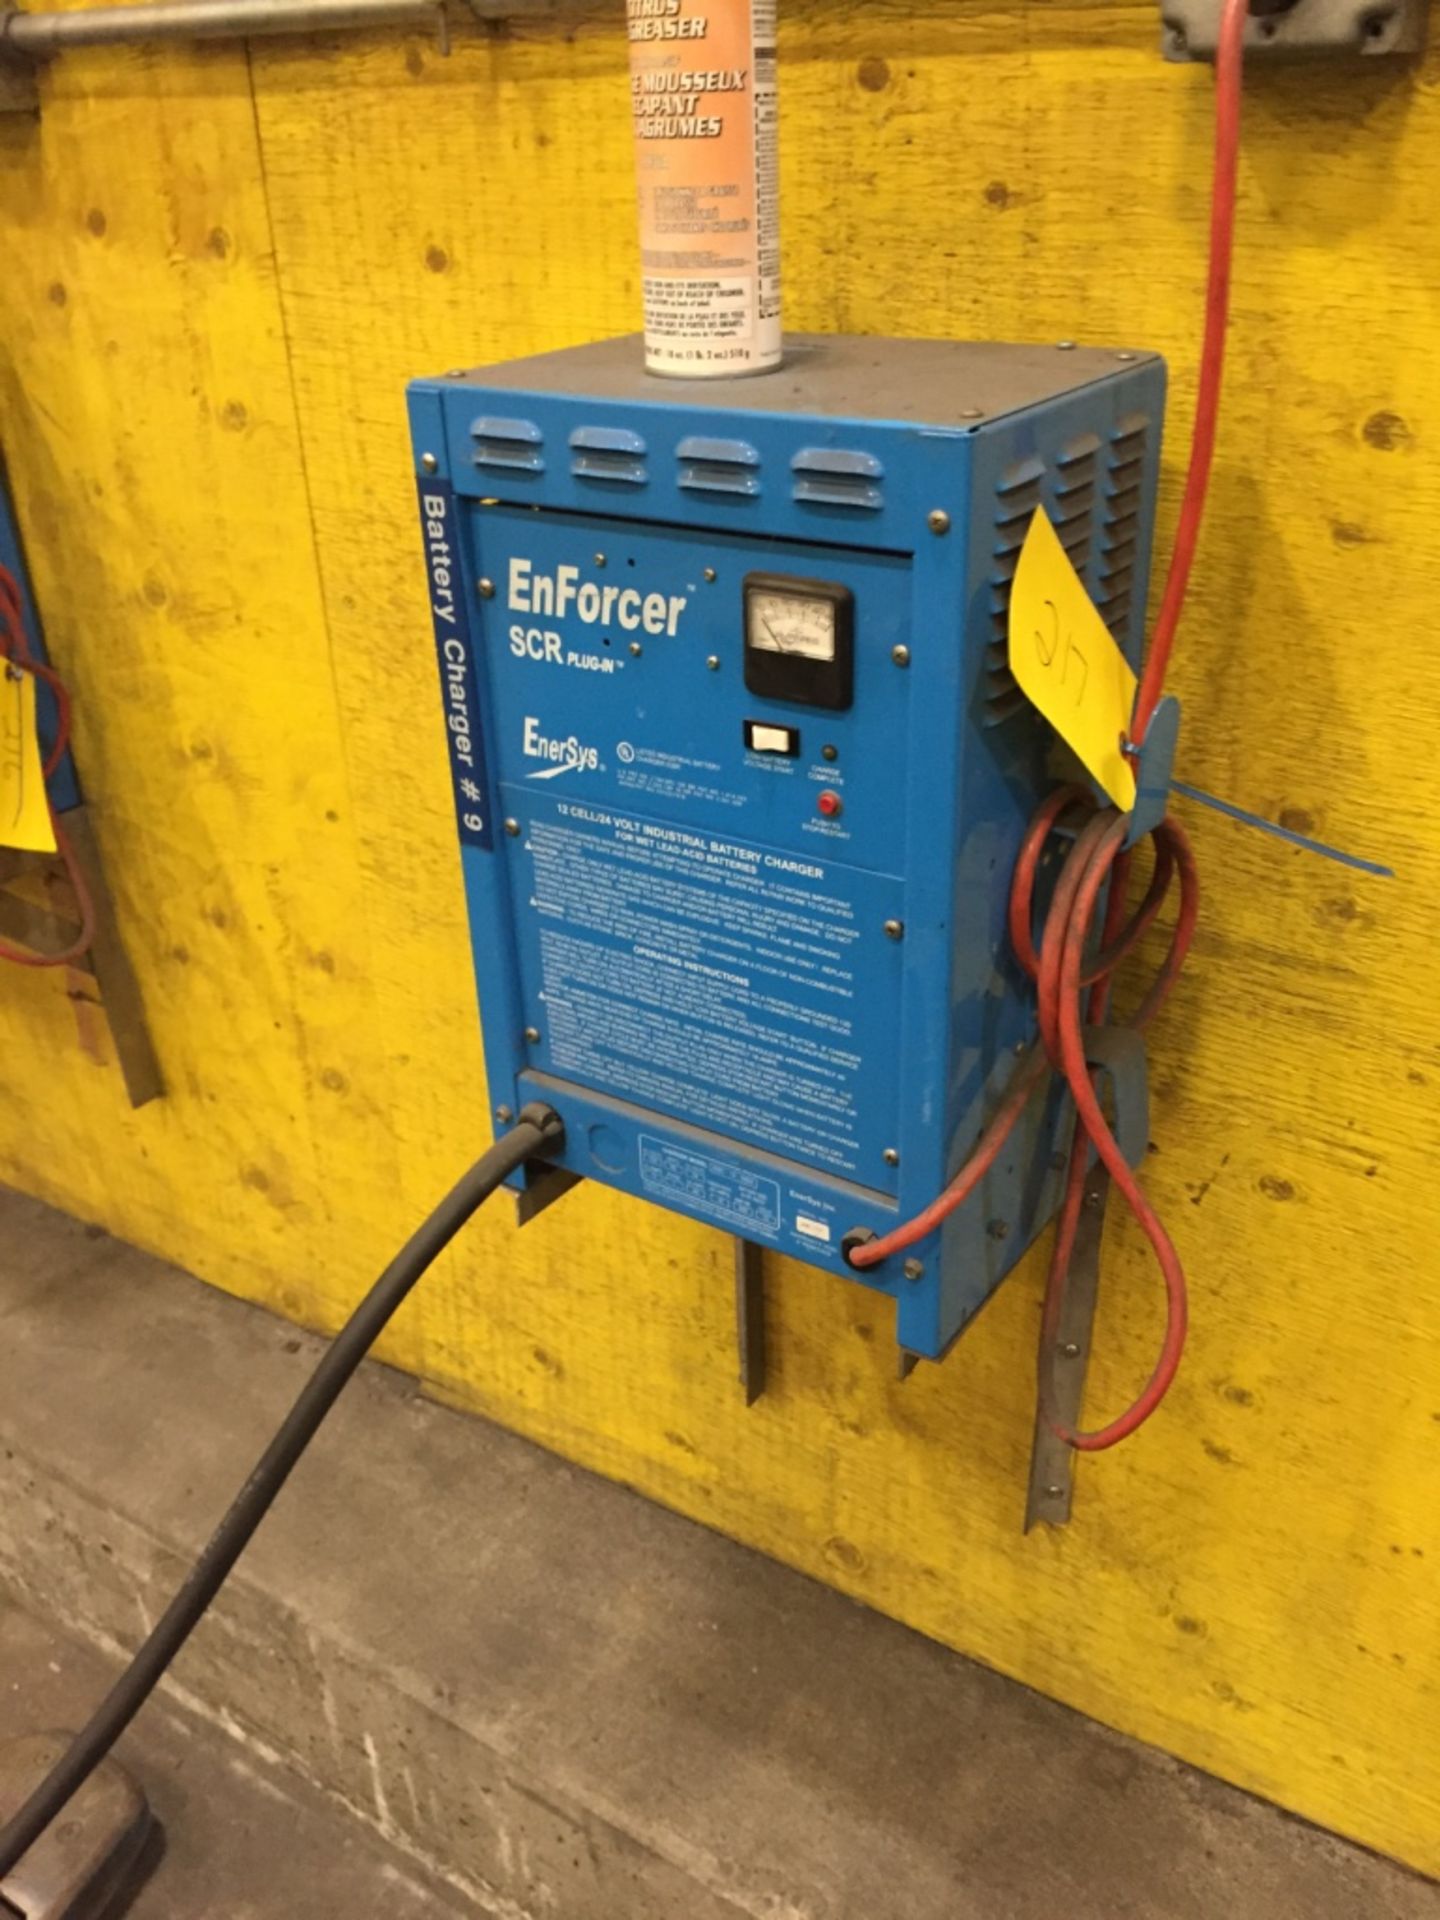 Enersys EnForcer SCR Plug In Battery Charger - Rigging Fee $100, If Crating or Lumber is Neede